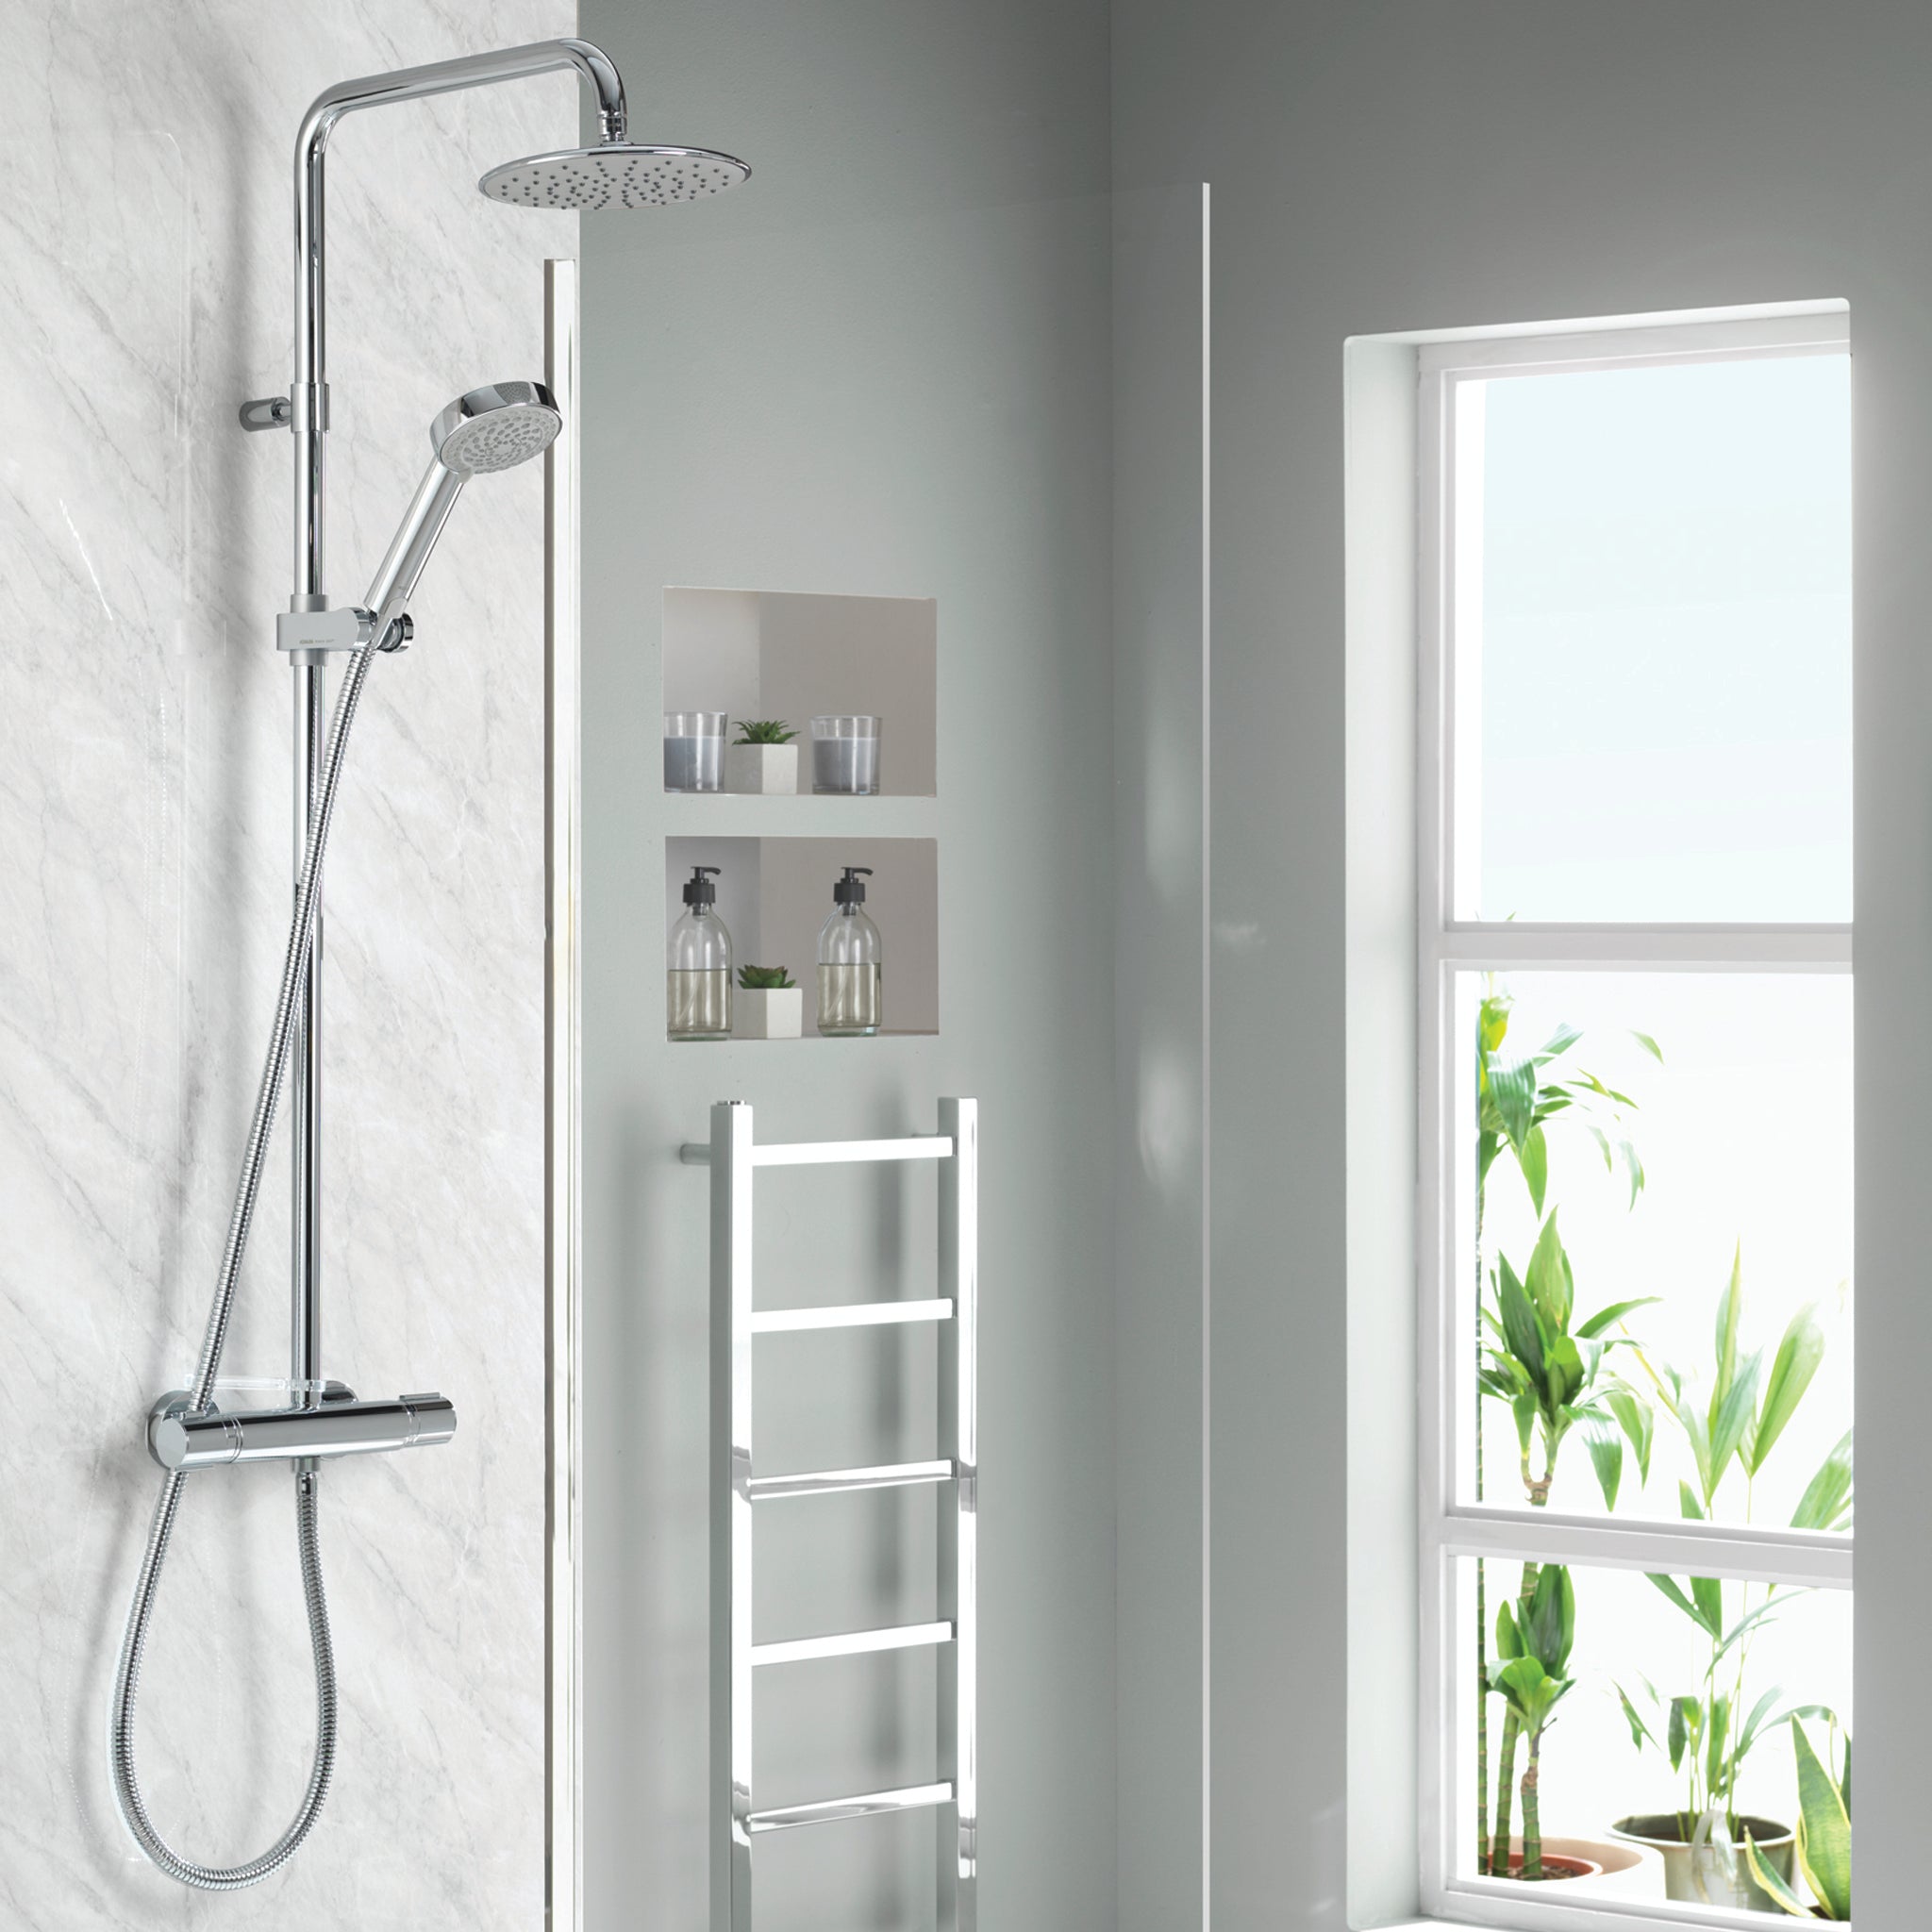 Aqualisa Midas 110 Shower Column - Exposed With Adjustable And Fixed Head against wall panel in white MD110SC